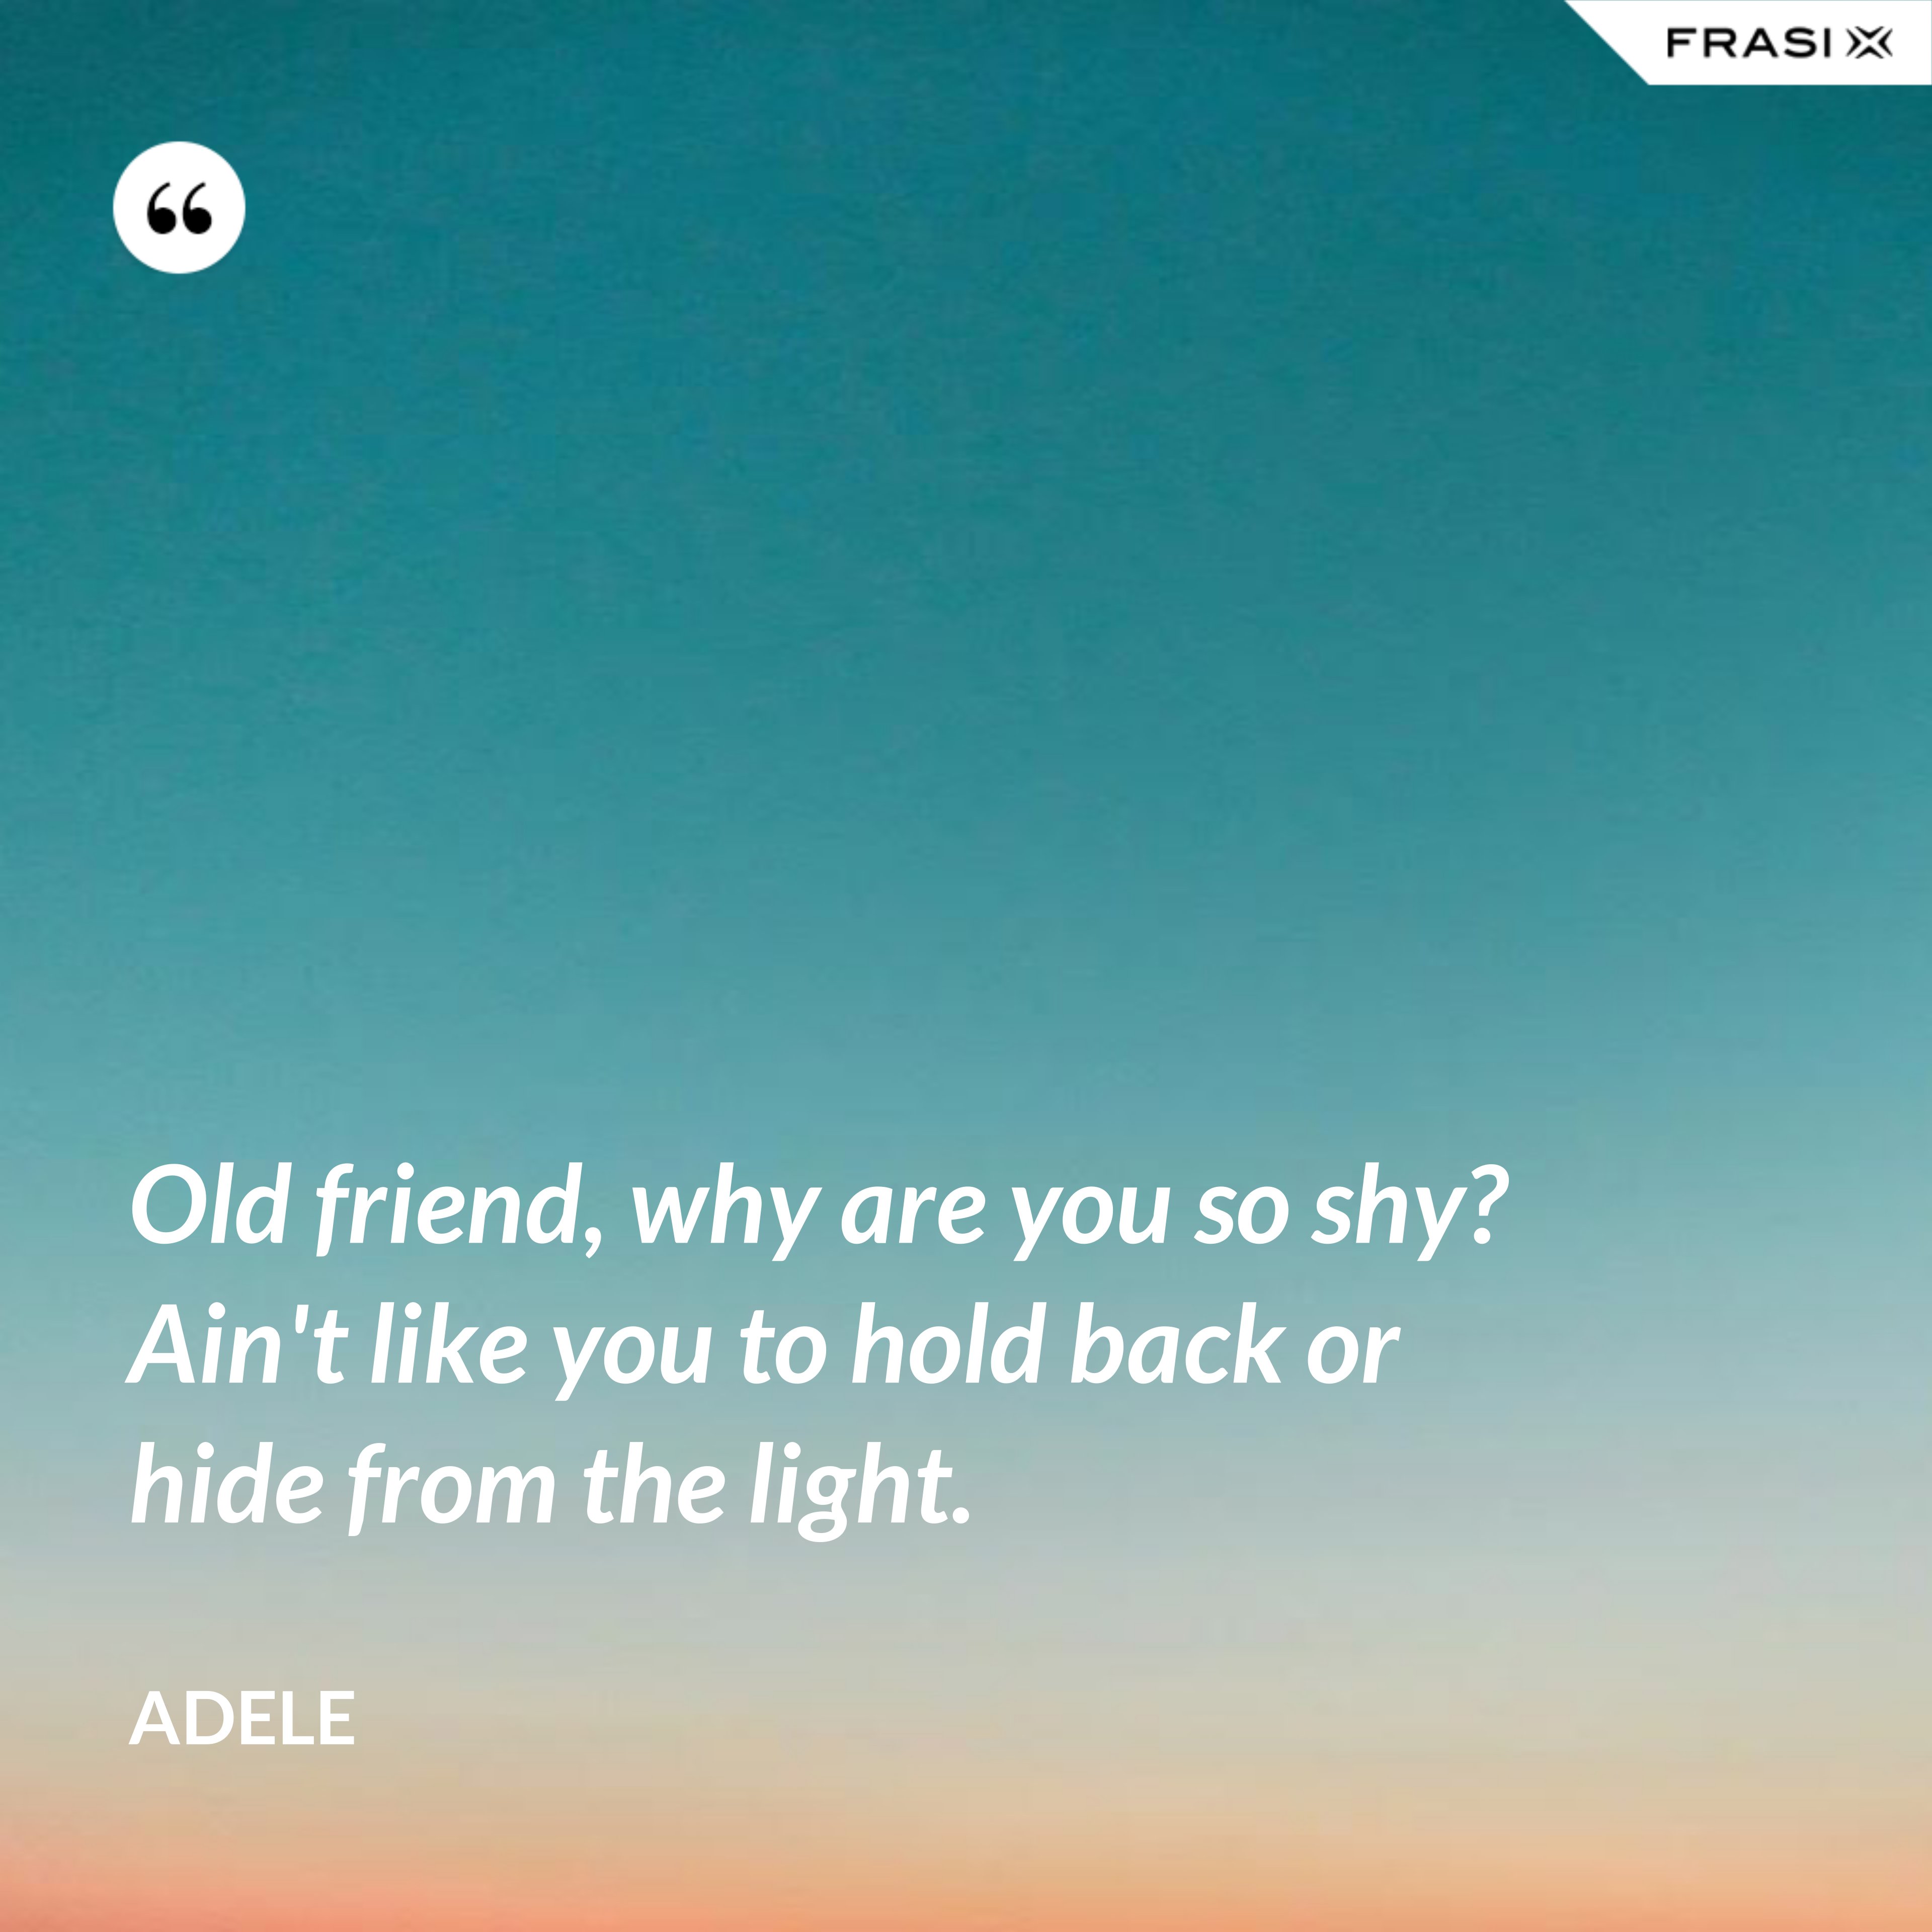 Old friend, why are you so shy? Ain't like you to hold back or hide from the light. - Adele